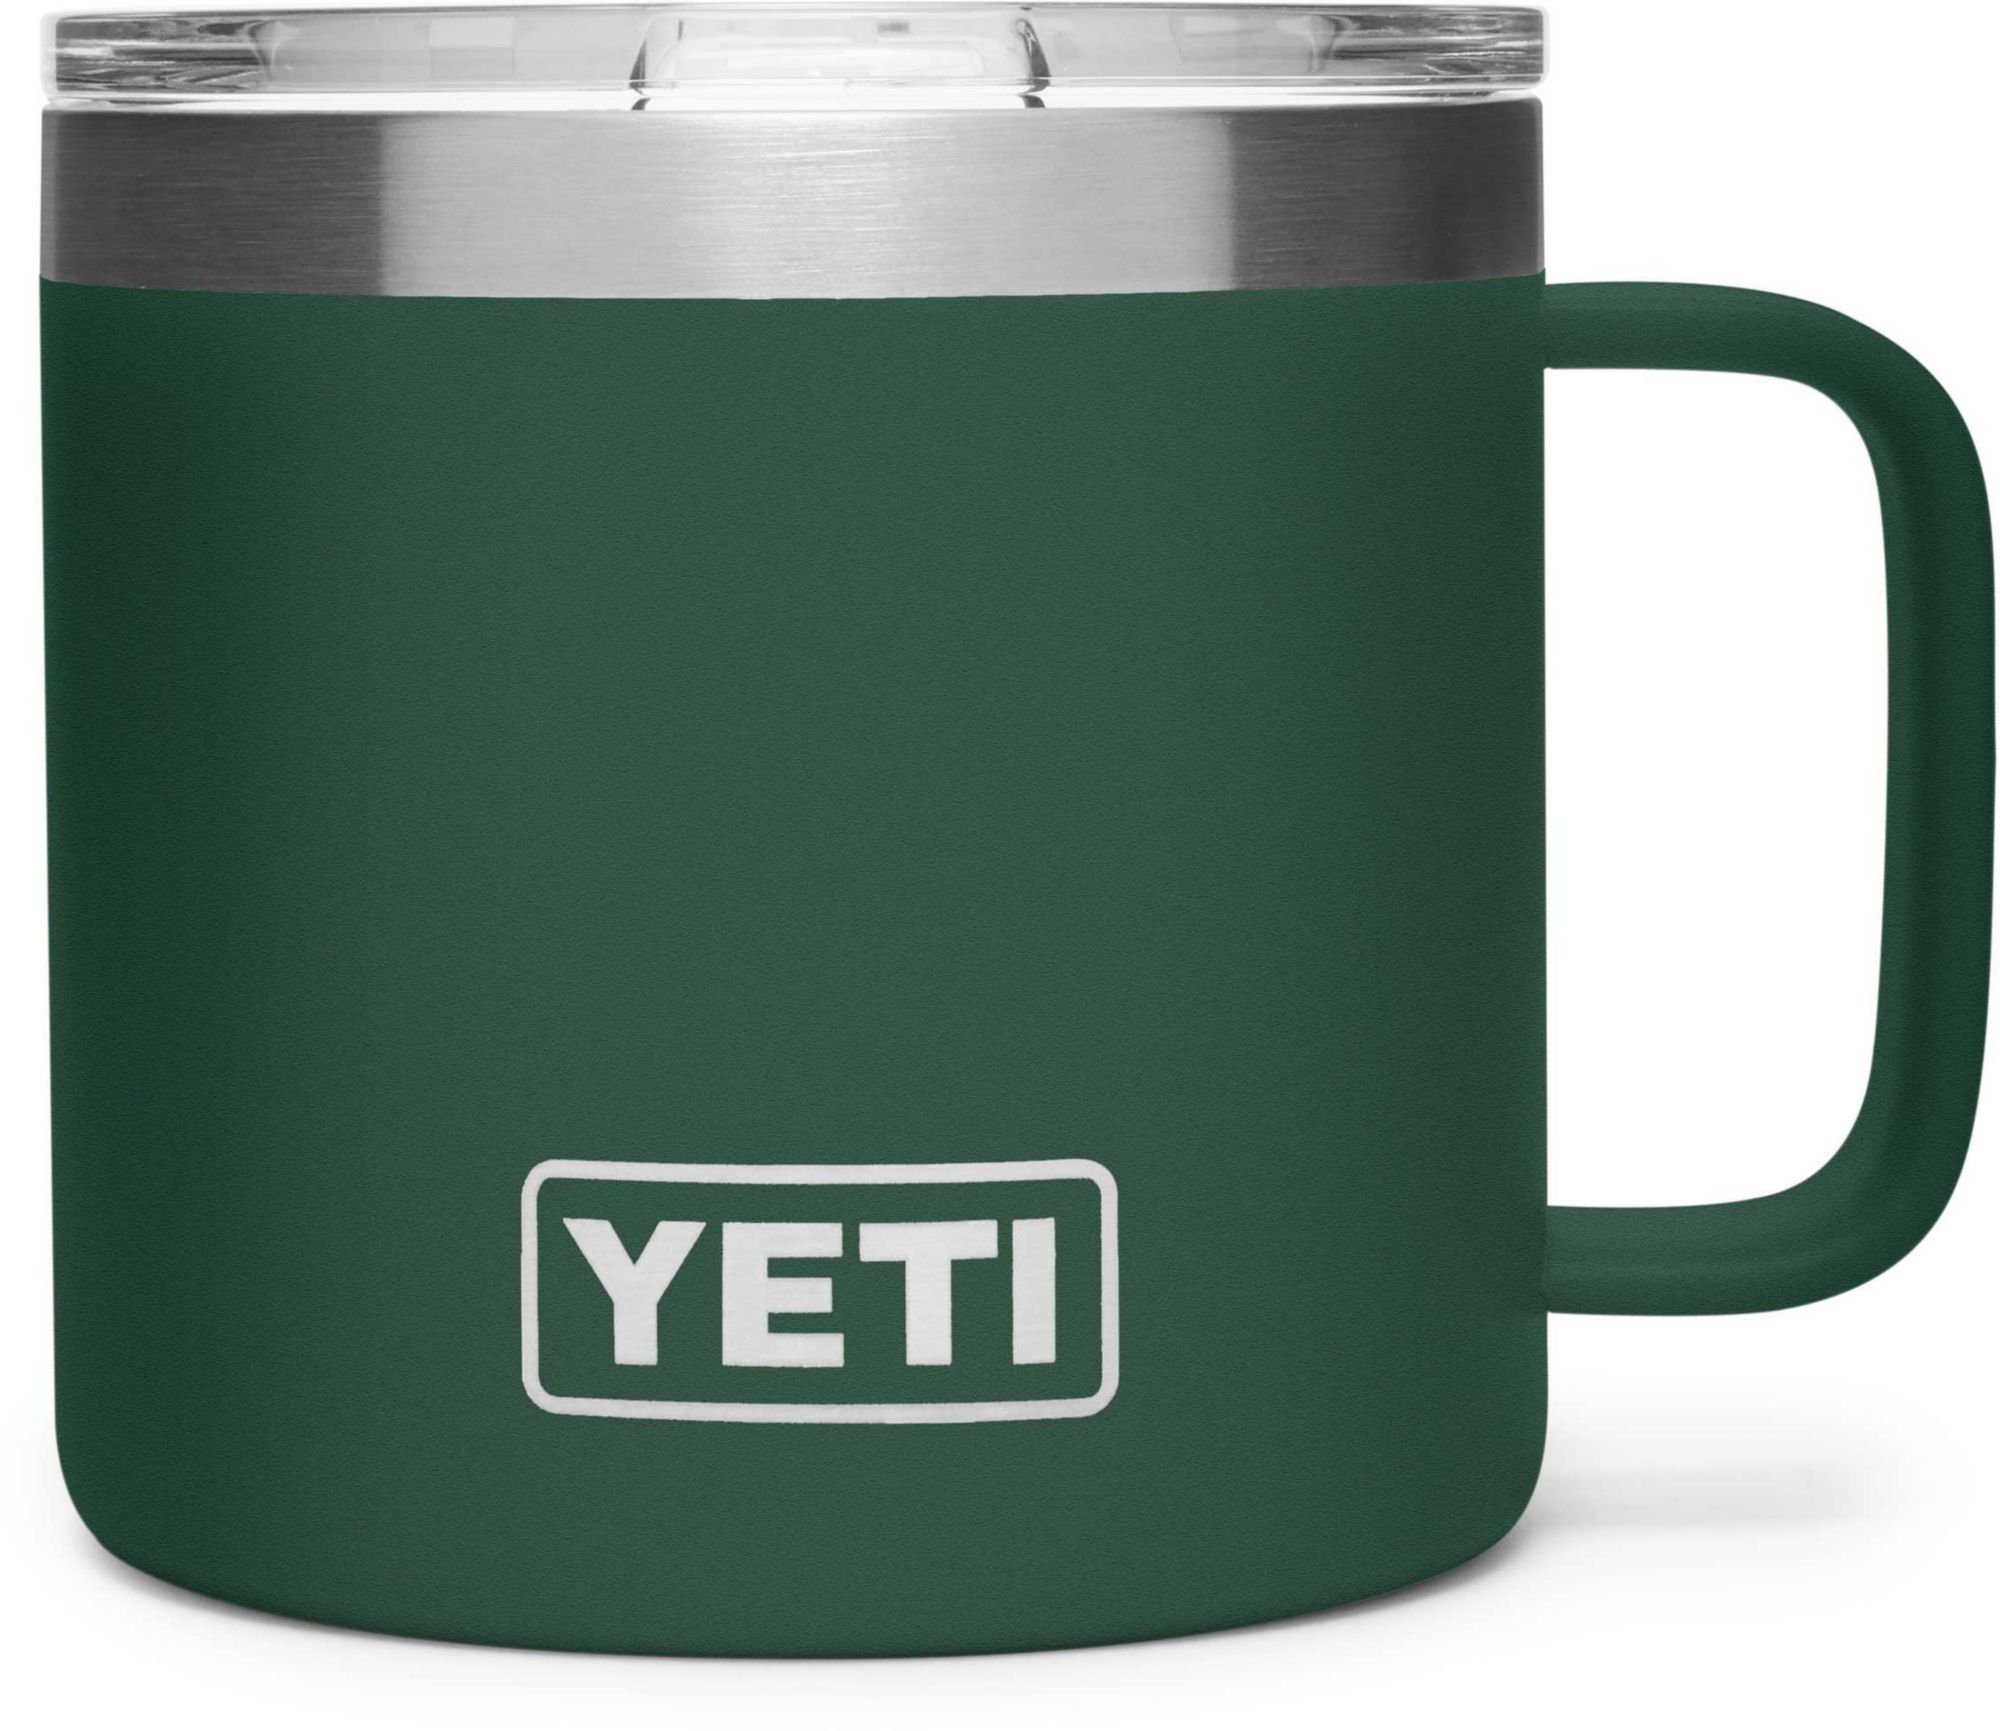 are yetis good for coffee